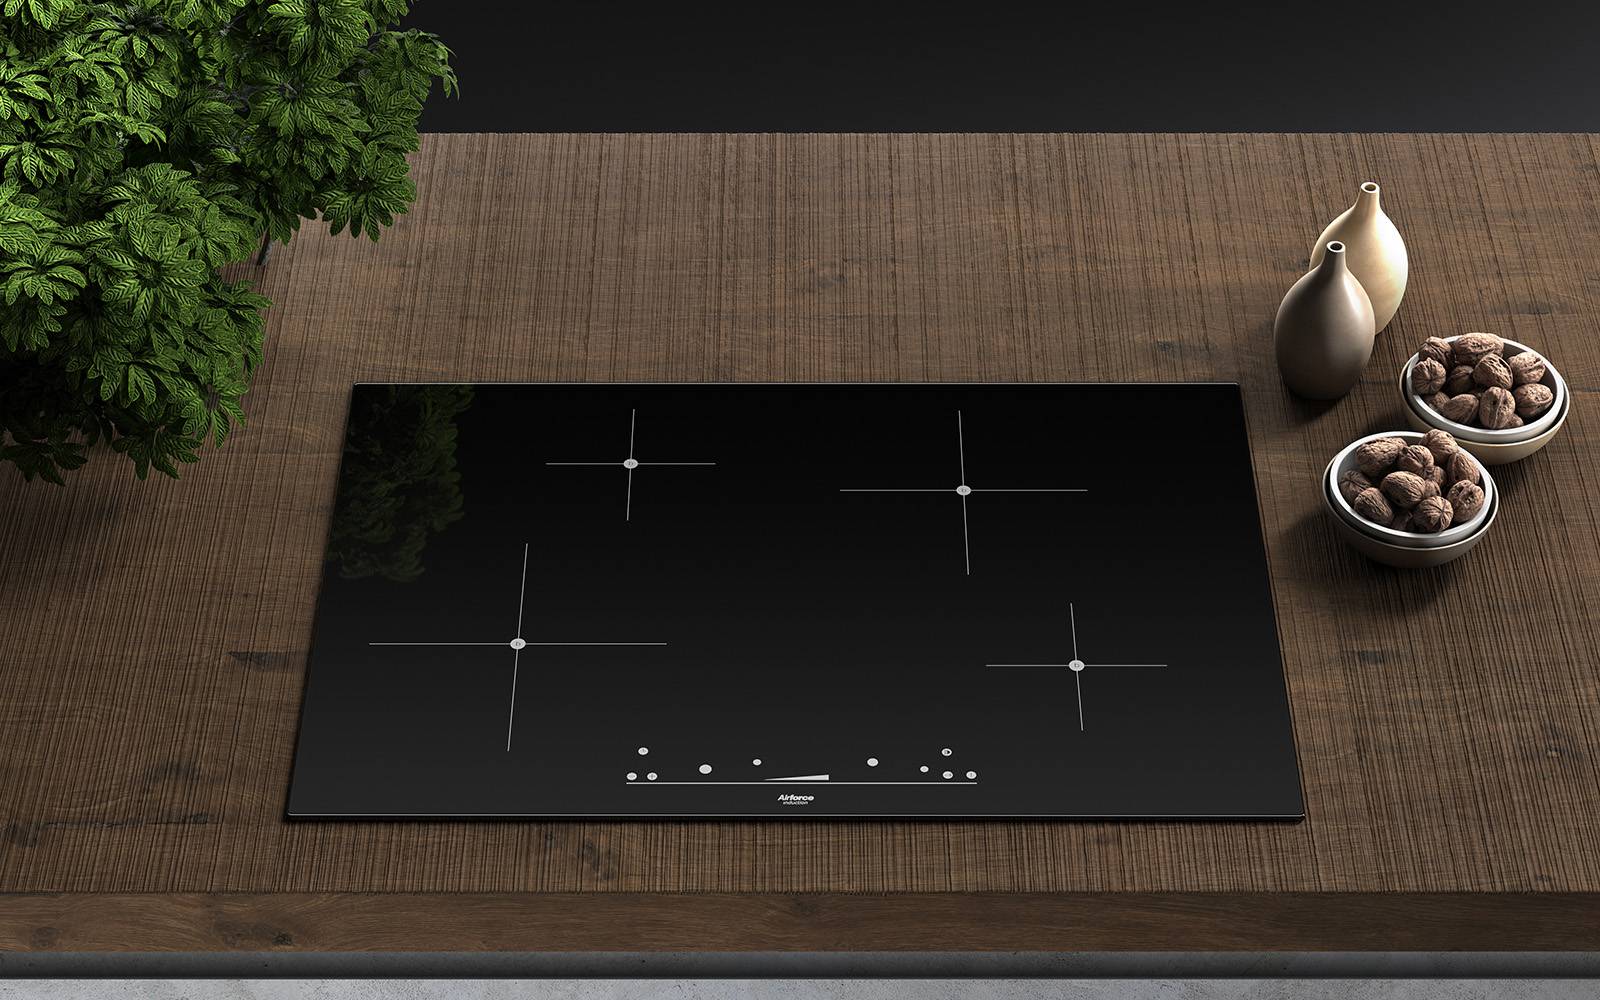 Airforce POP 80-4 78cm Induction Hob with Touch Control-Black Glass Finish